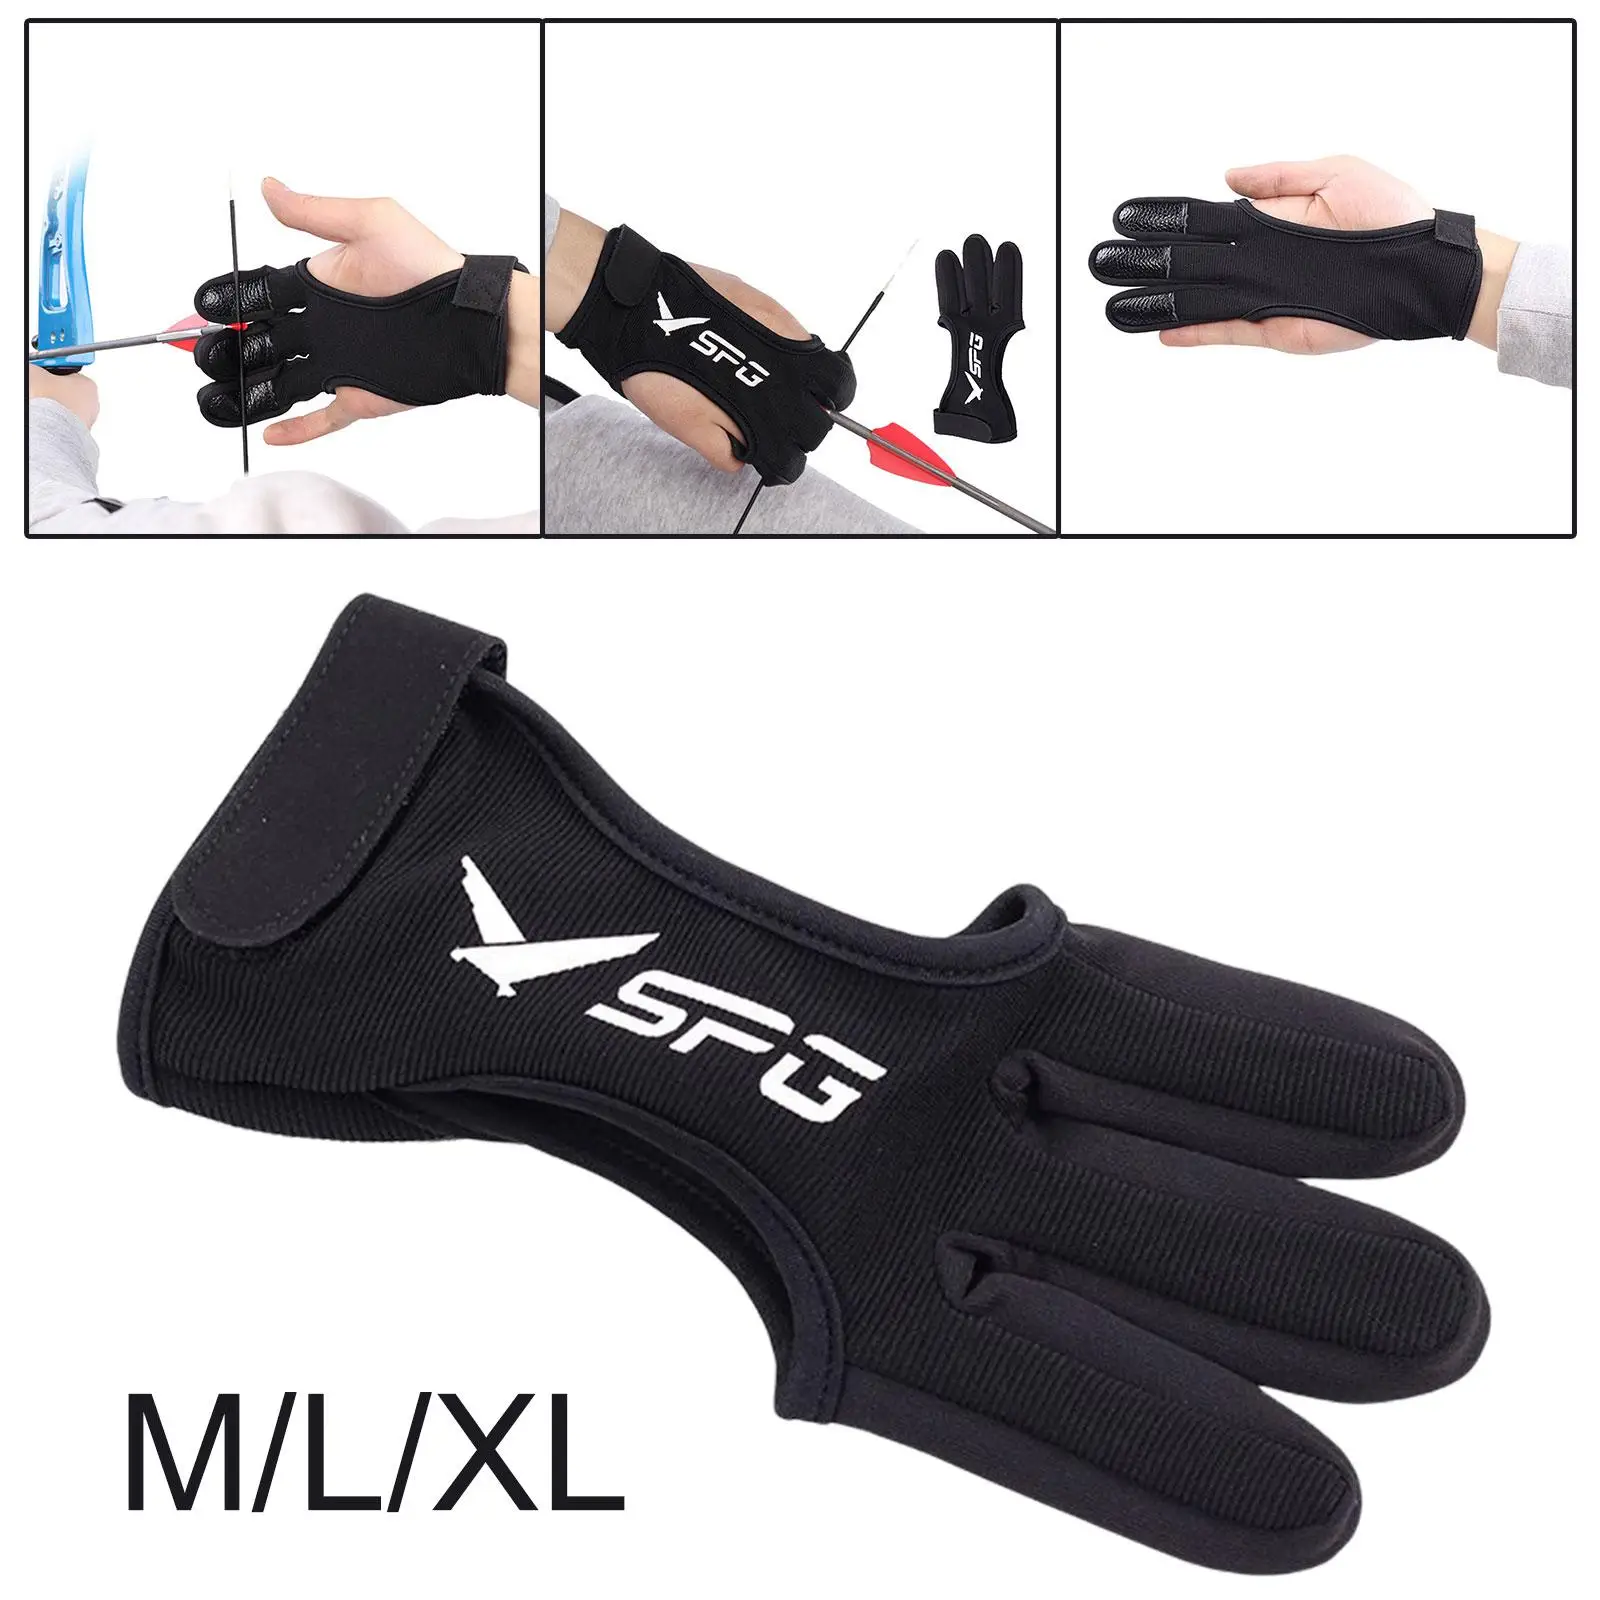 Glove 3 Fingers Compound Recurve Bow Guard Hunting Glove